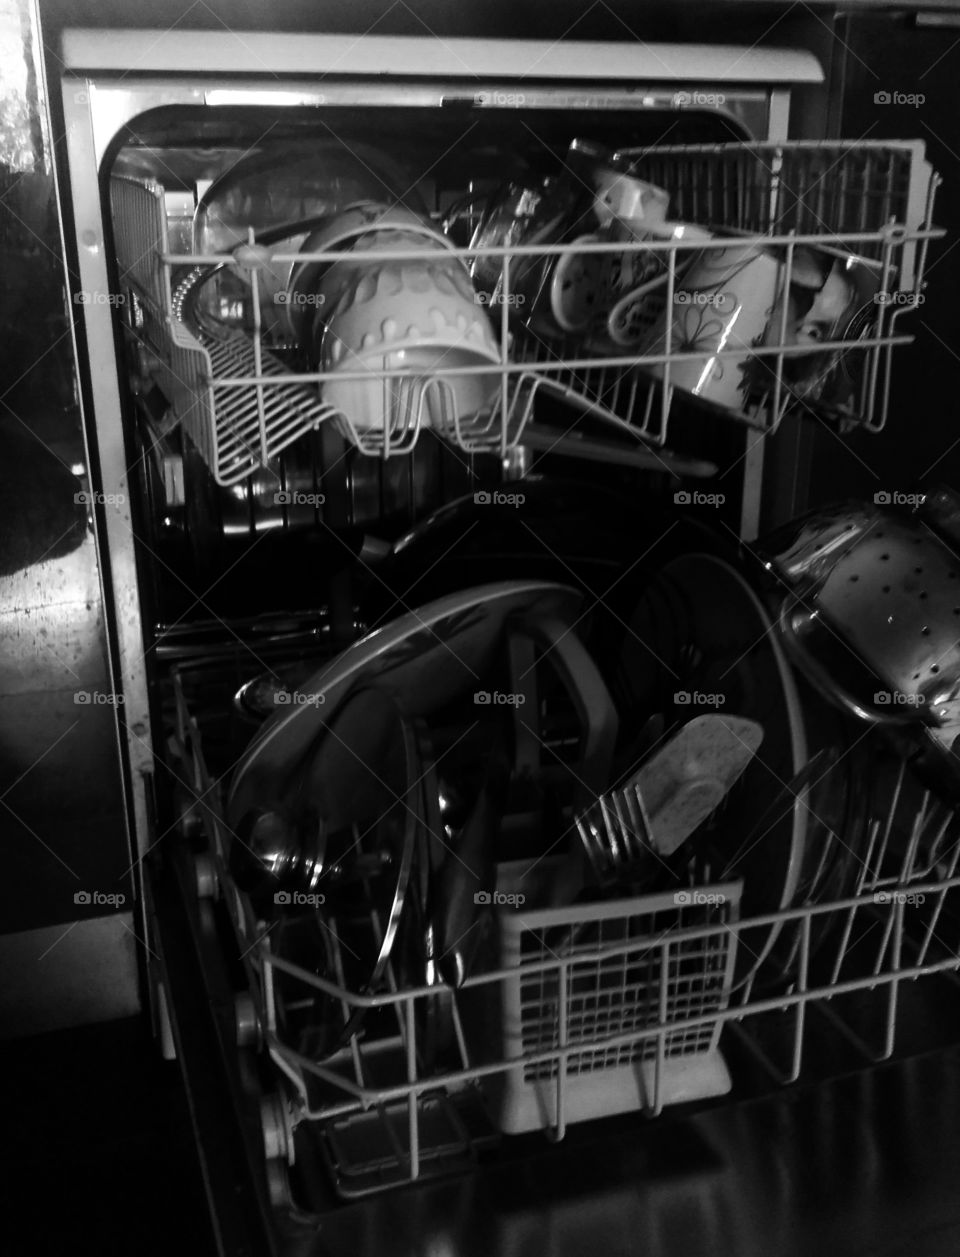 messy dishes waiting to be washed in an open dishwasher